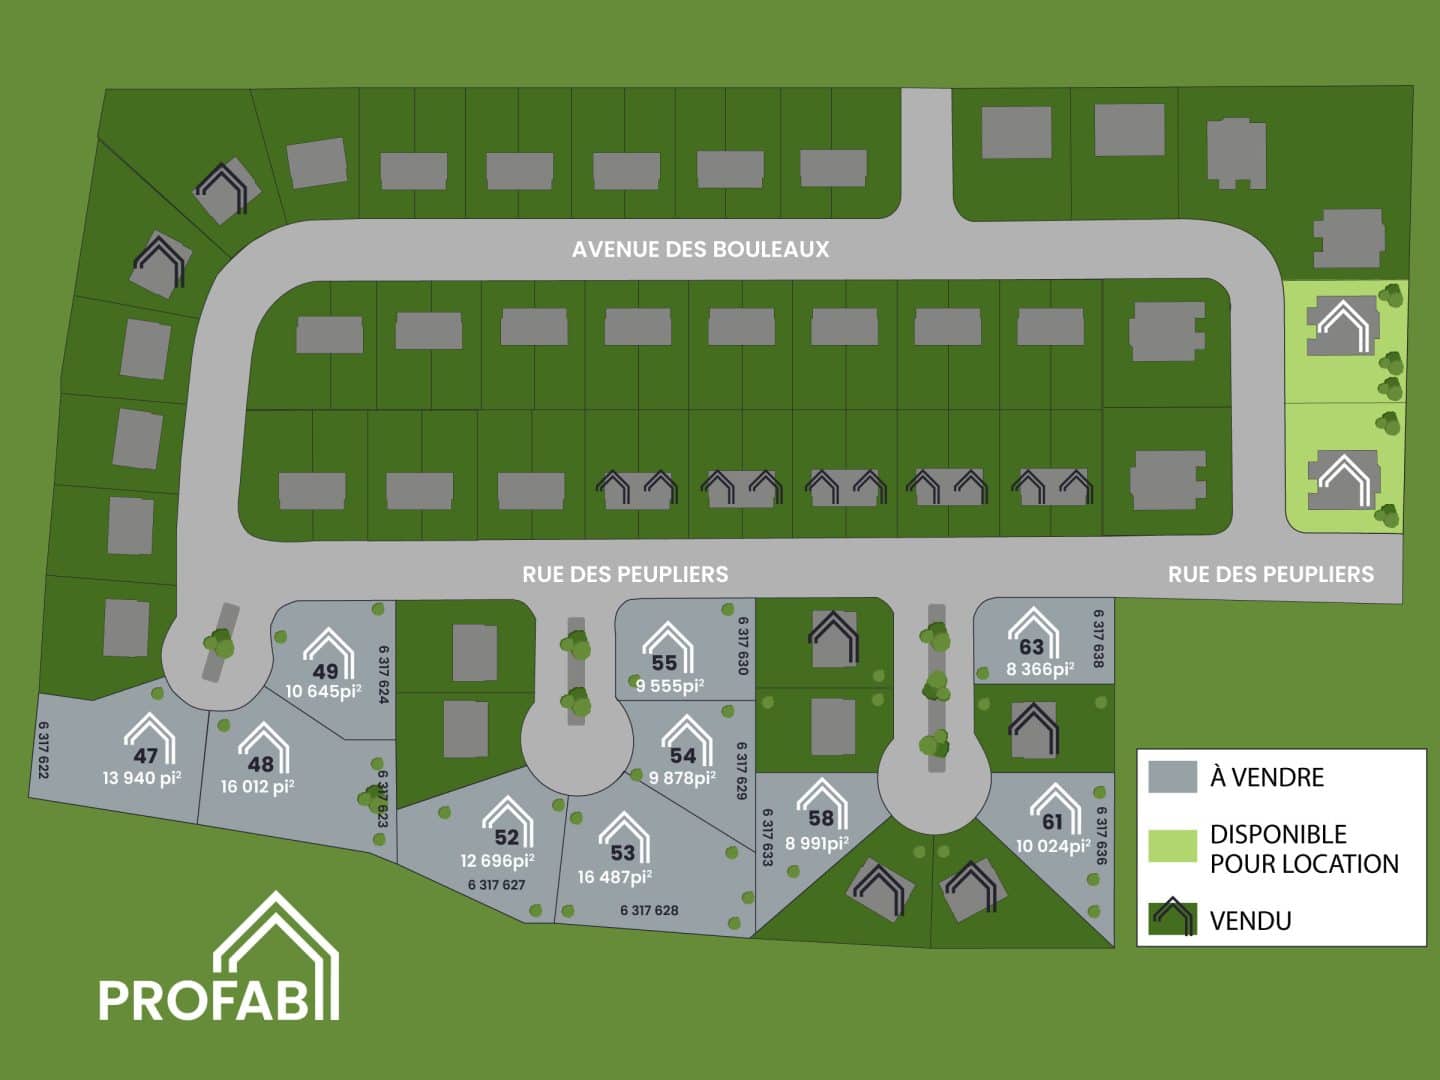 Vallée jonction subdivision plan. Vacant lot number 58 for sale.